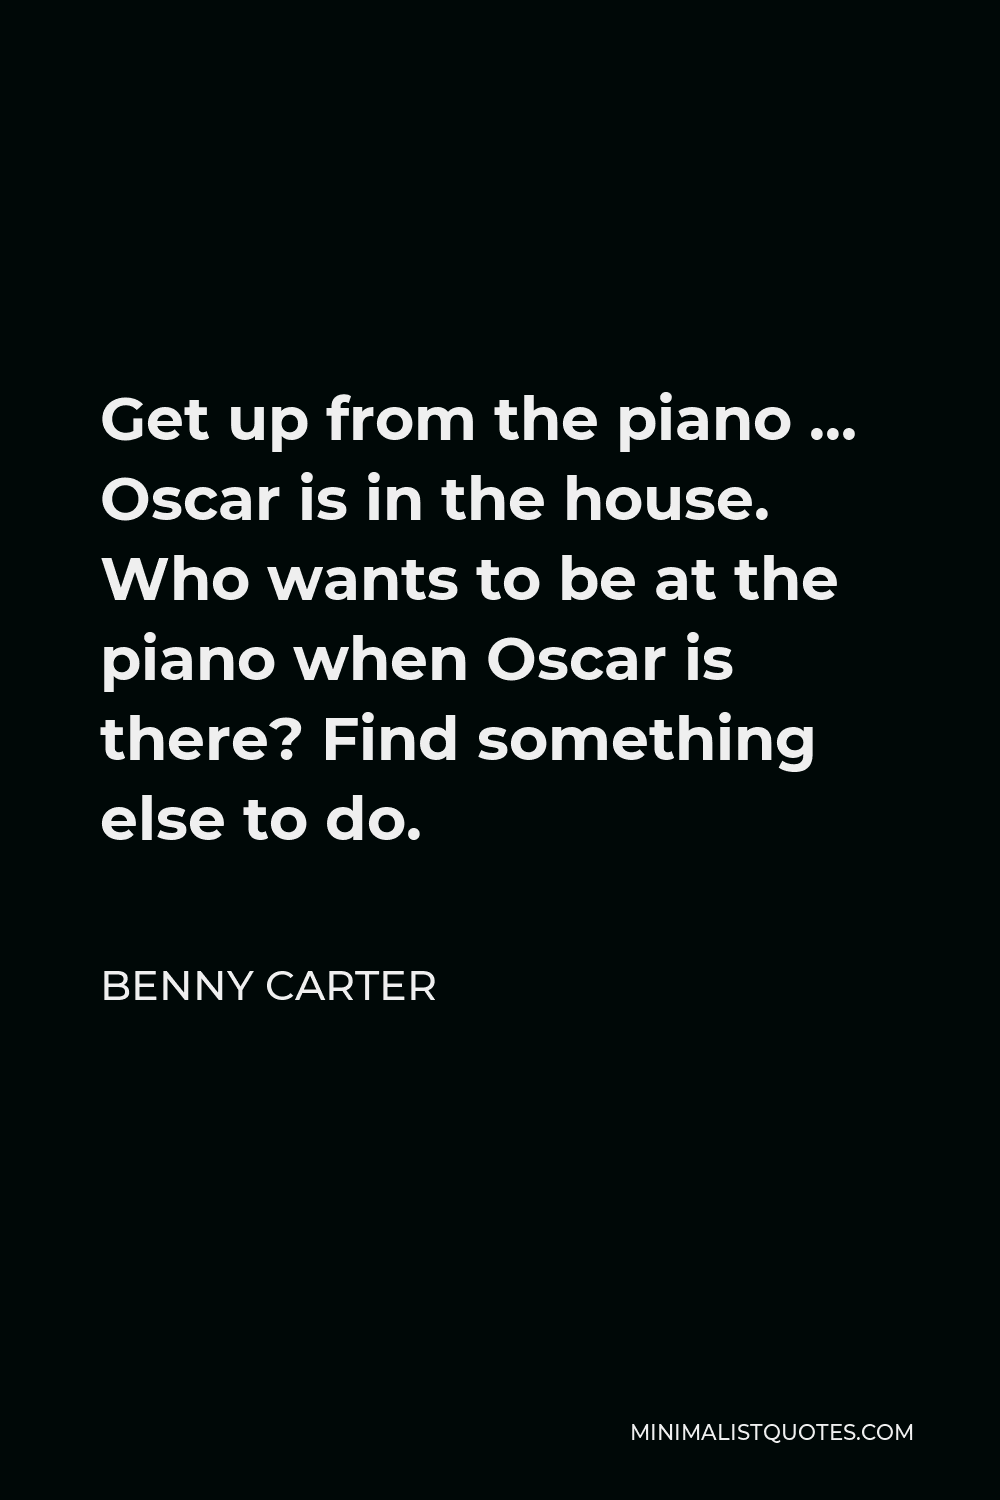 Benny Carter Quote - Get up from the piano … Oscar is in the house. Who wants to be at the piano when Oscar is there? Find something else to do.